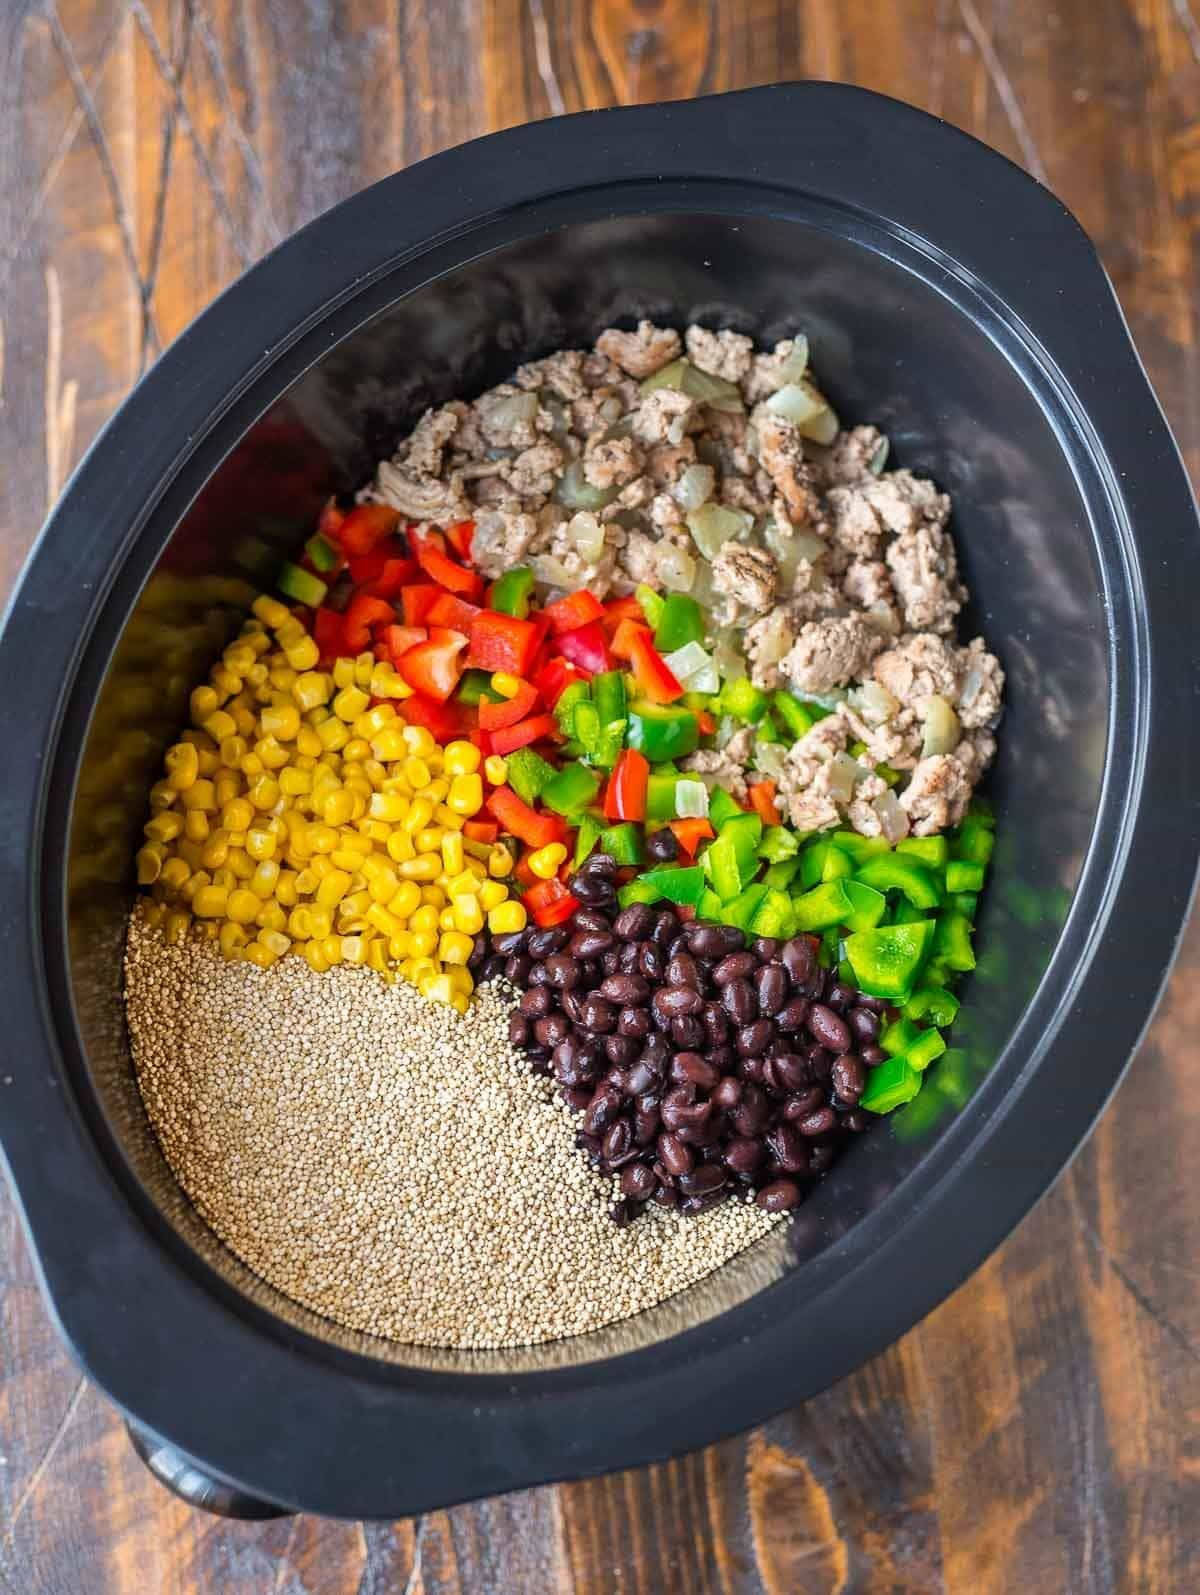 Healthy Ground Turkey Crock Pot Recipes
 Crock Pot Mexican Casserole with Quinoa Black Beans and